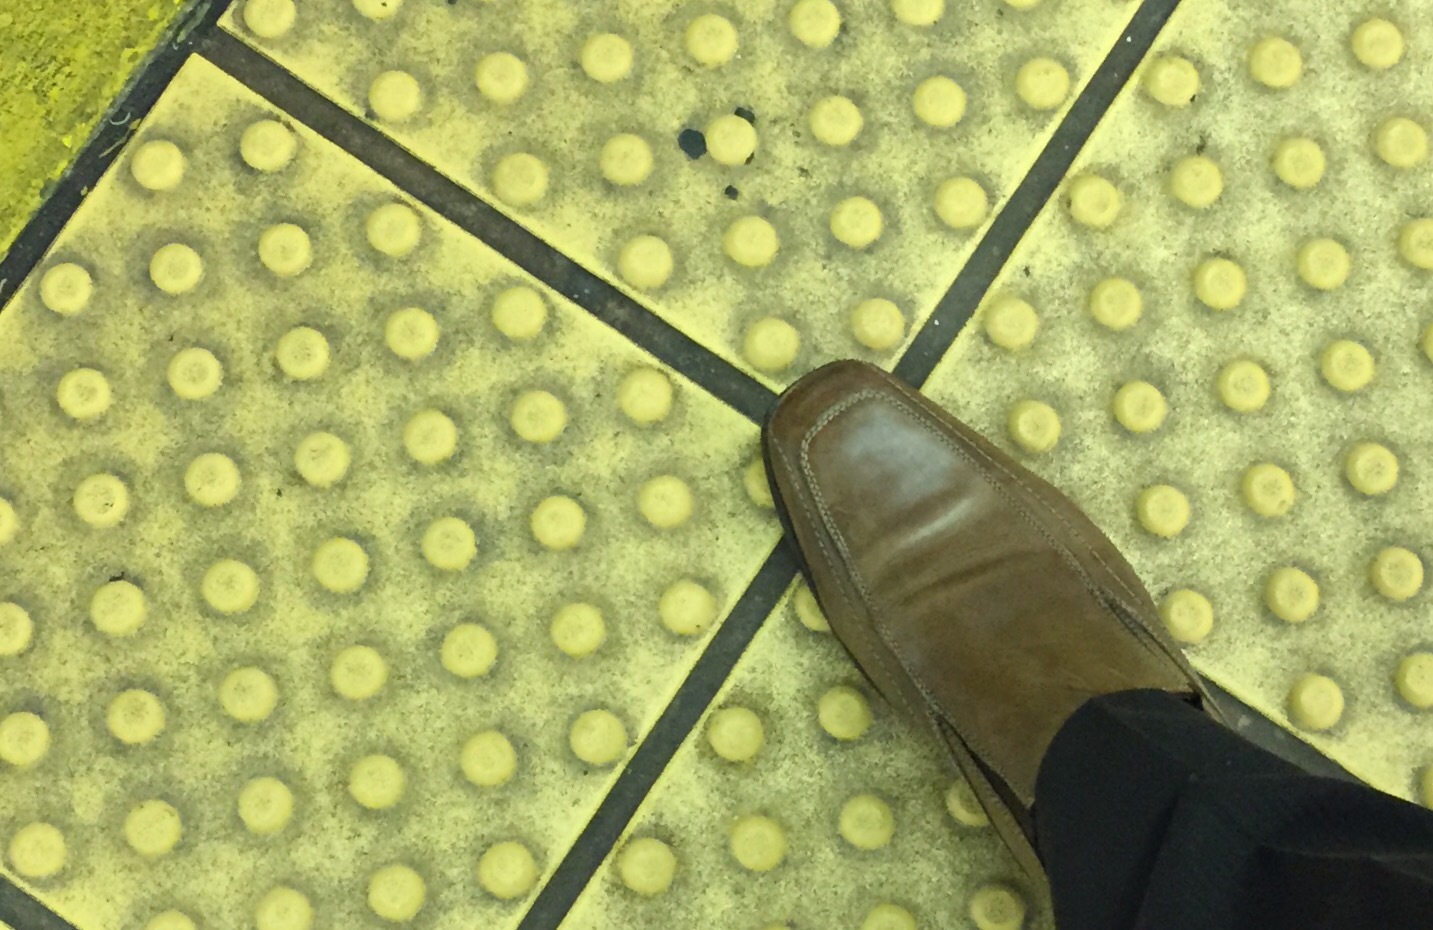 A foot on a tile